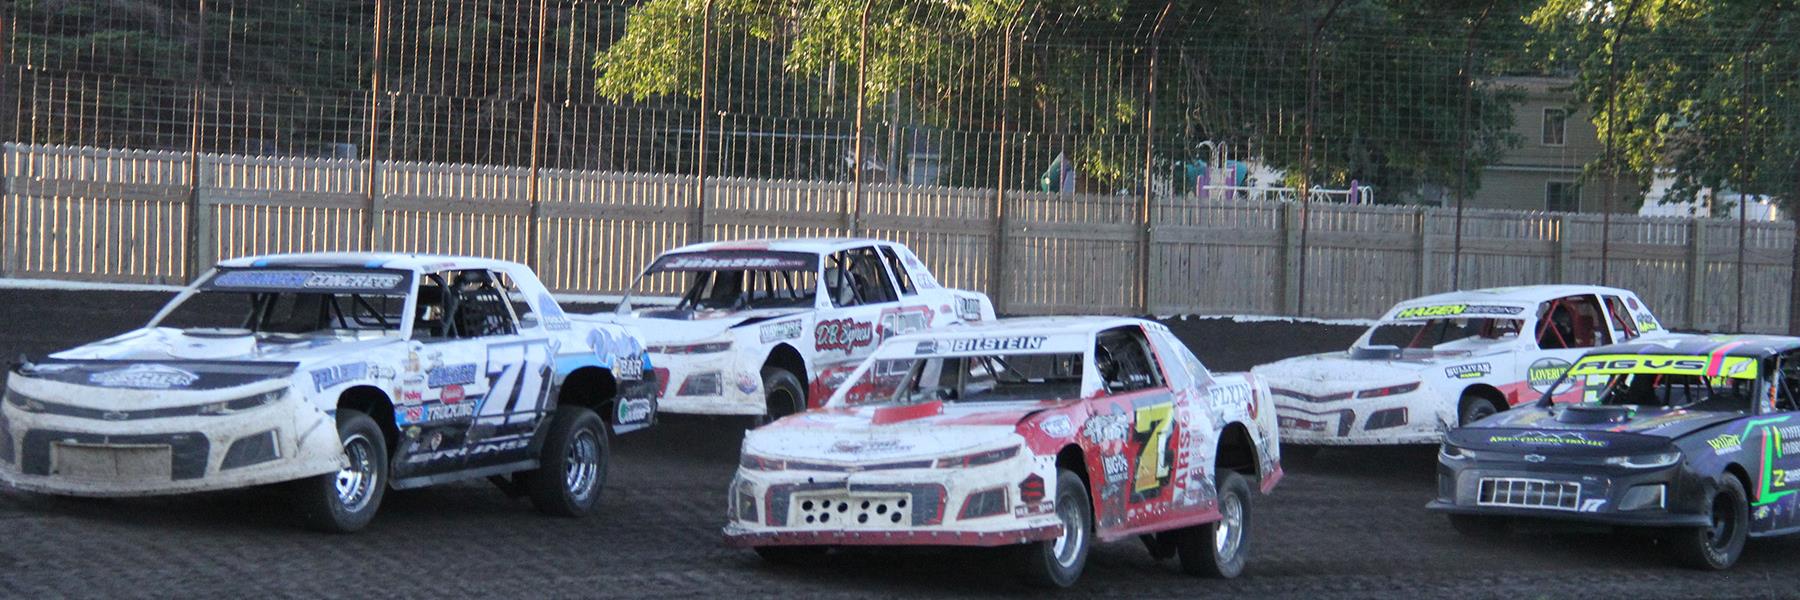 Murray County Speedway